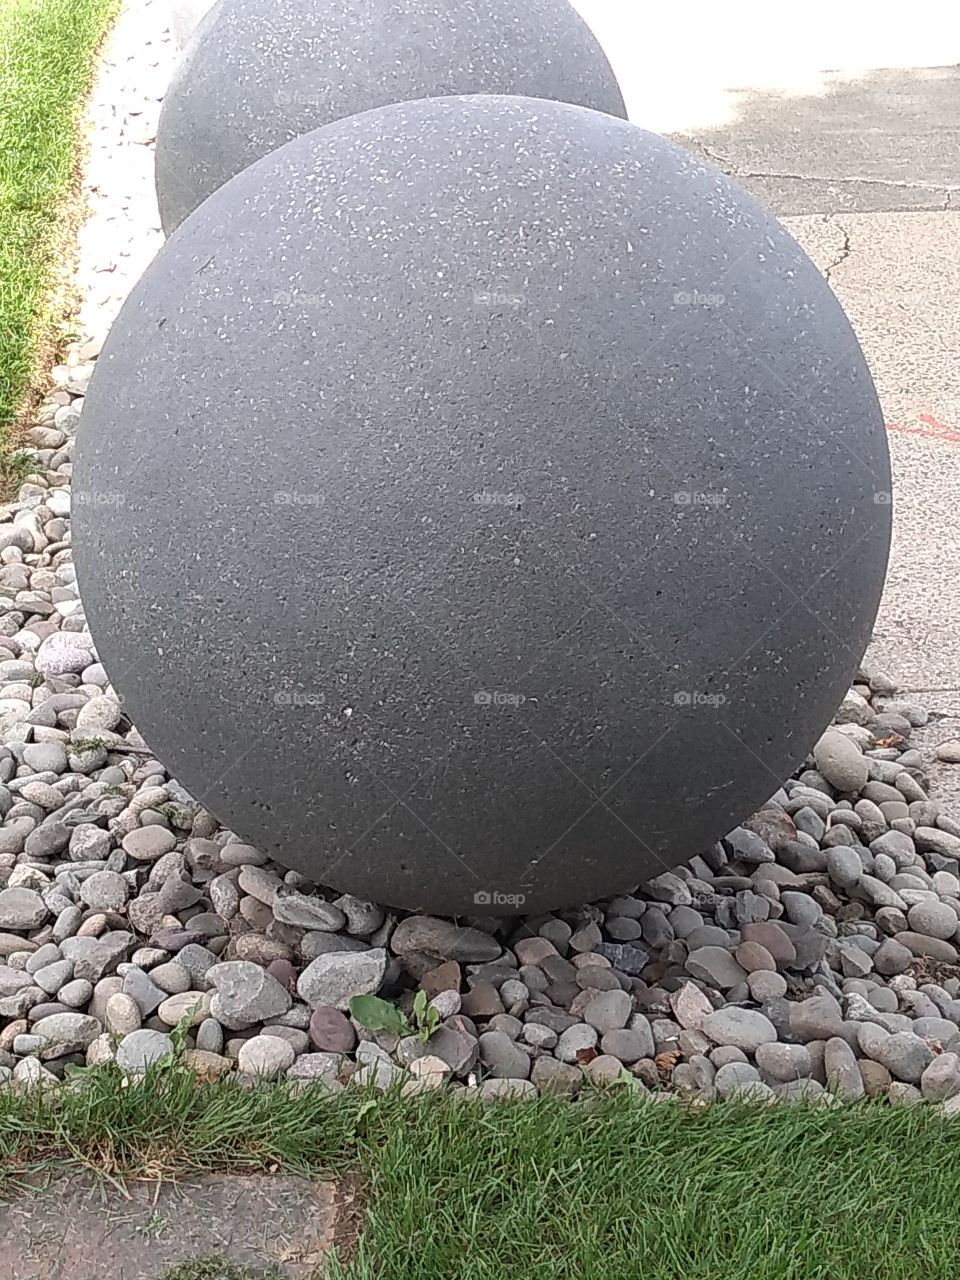 rock ball surrounded by rocks. balanced.